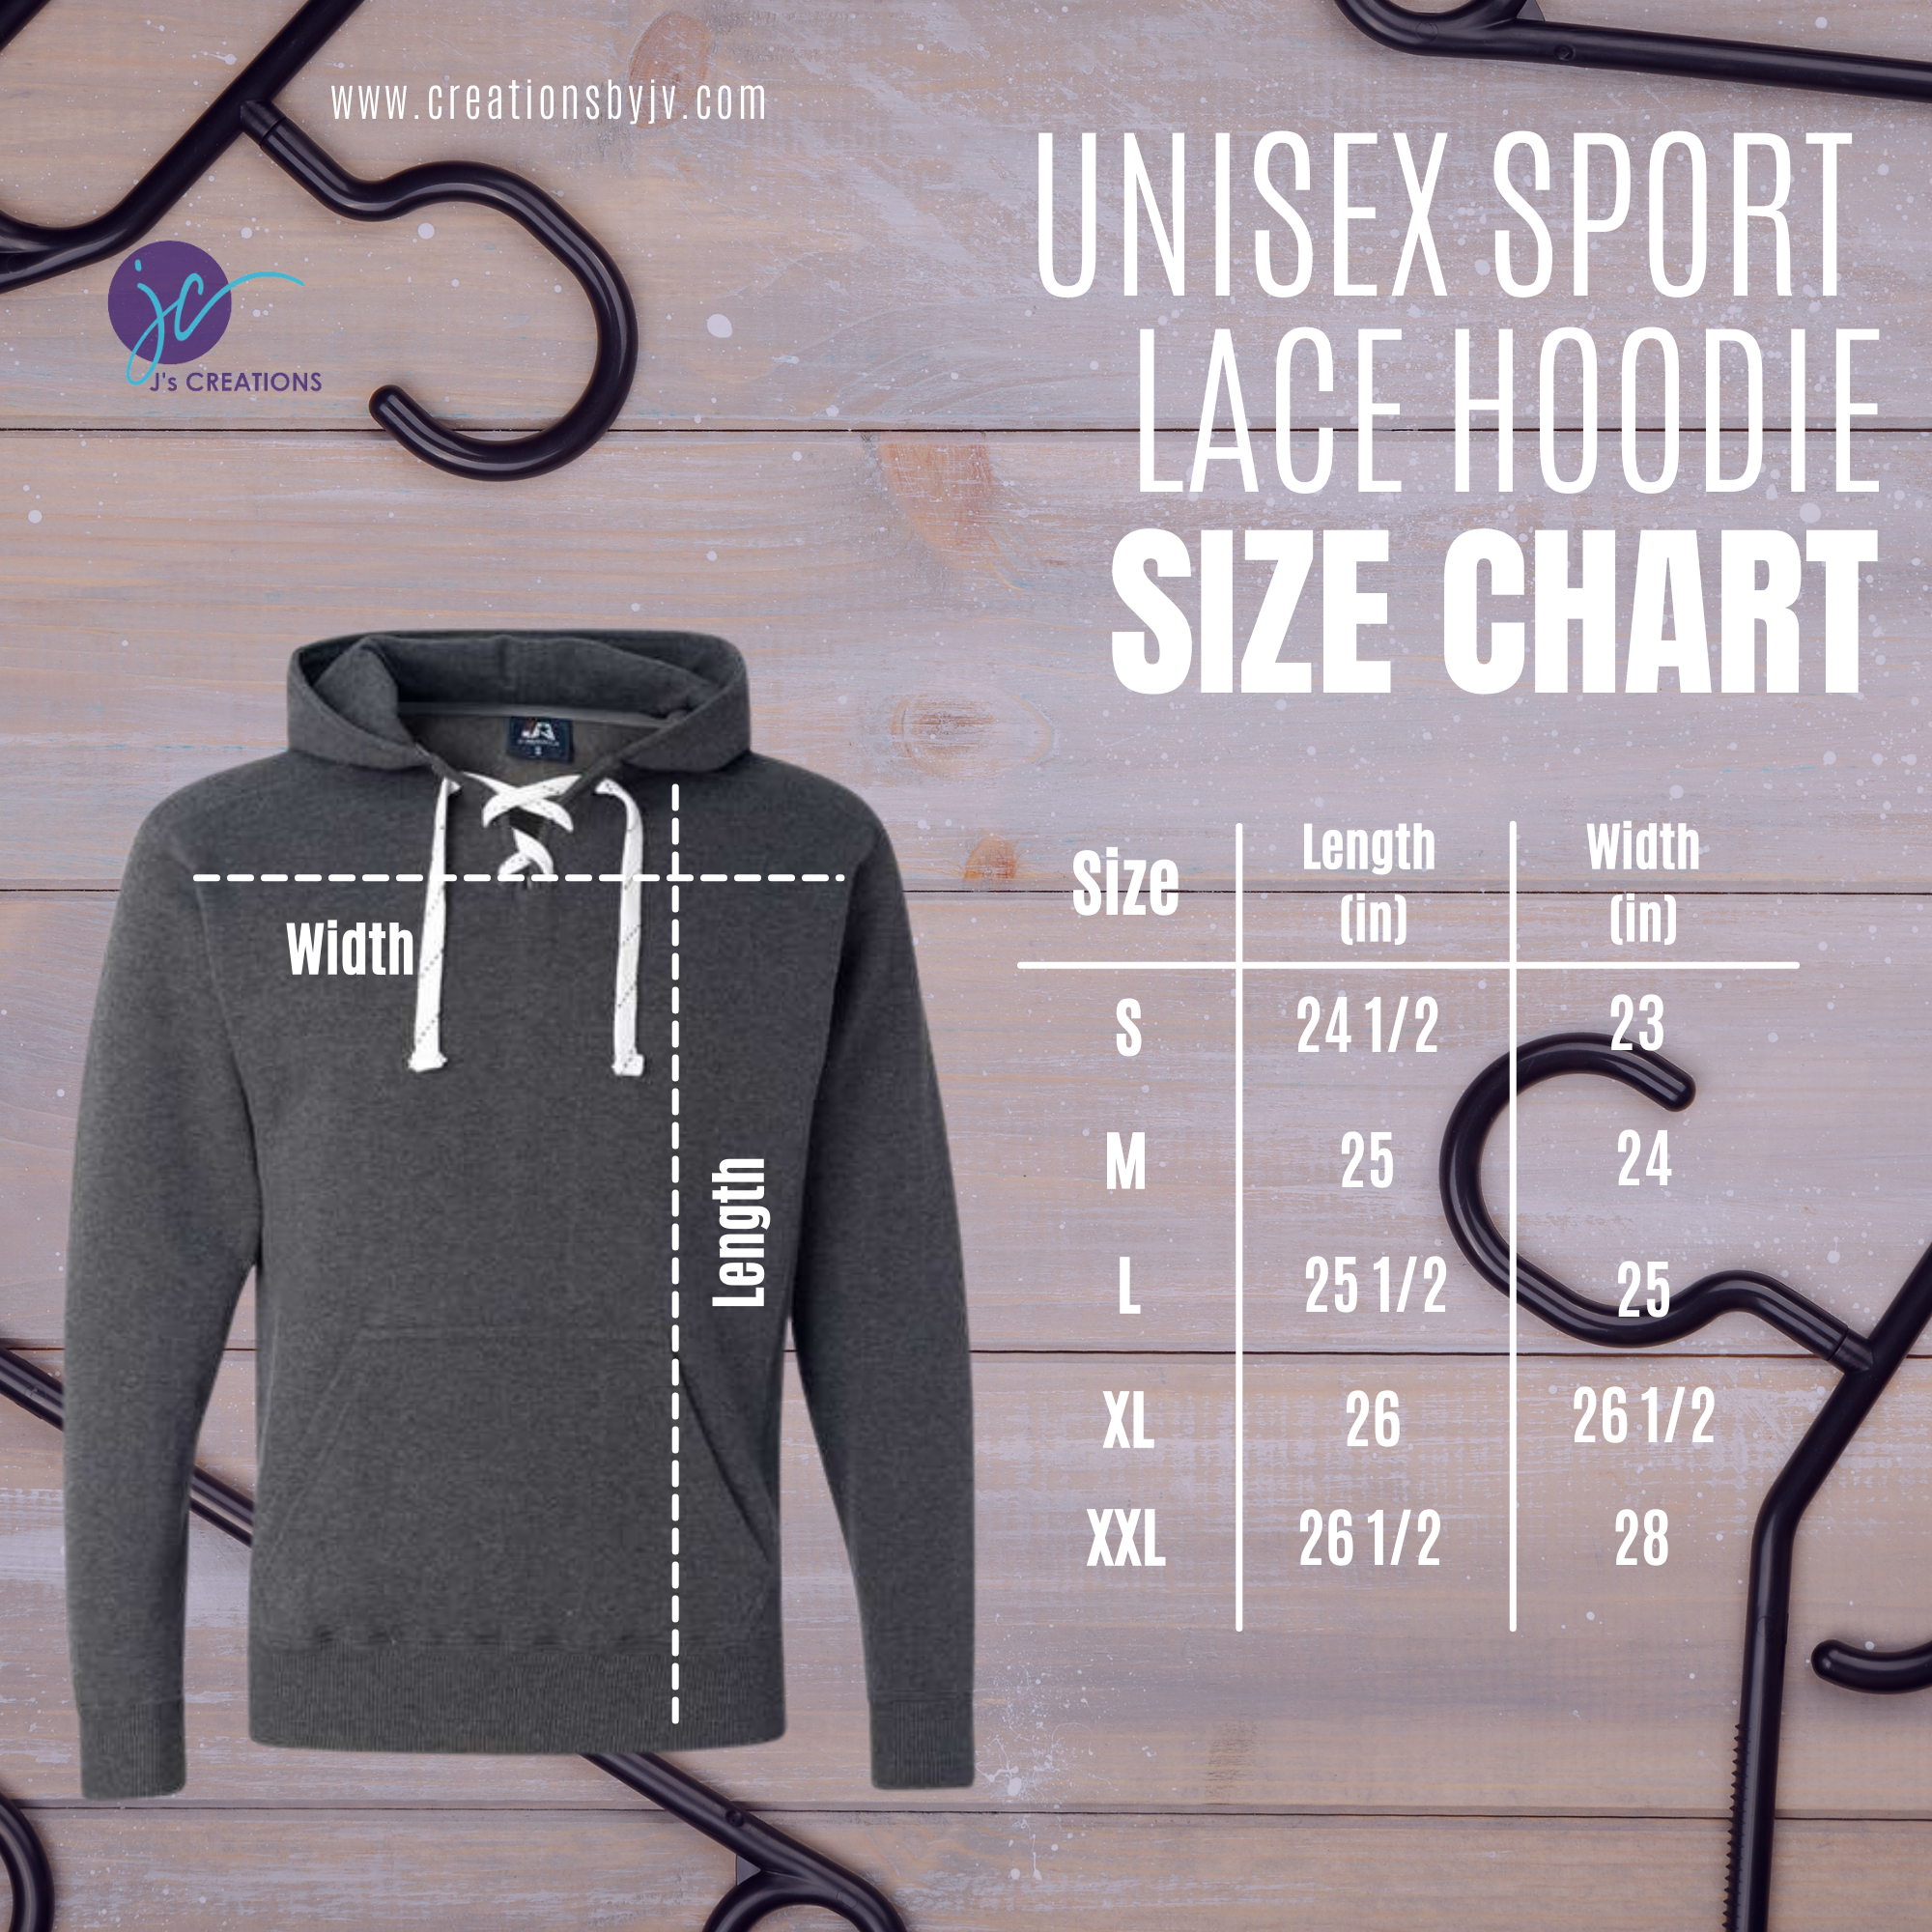 A size chart of the hoodie for men.